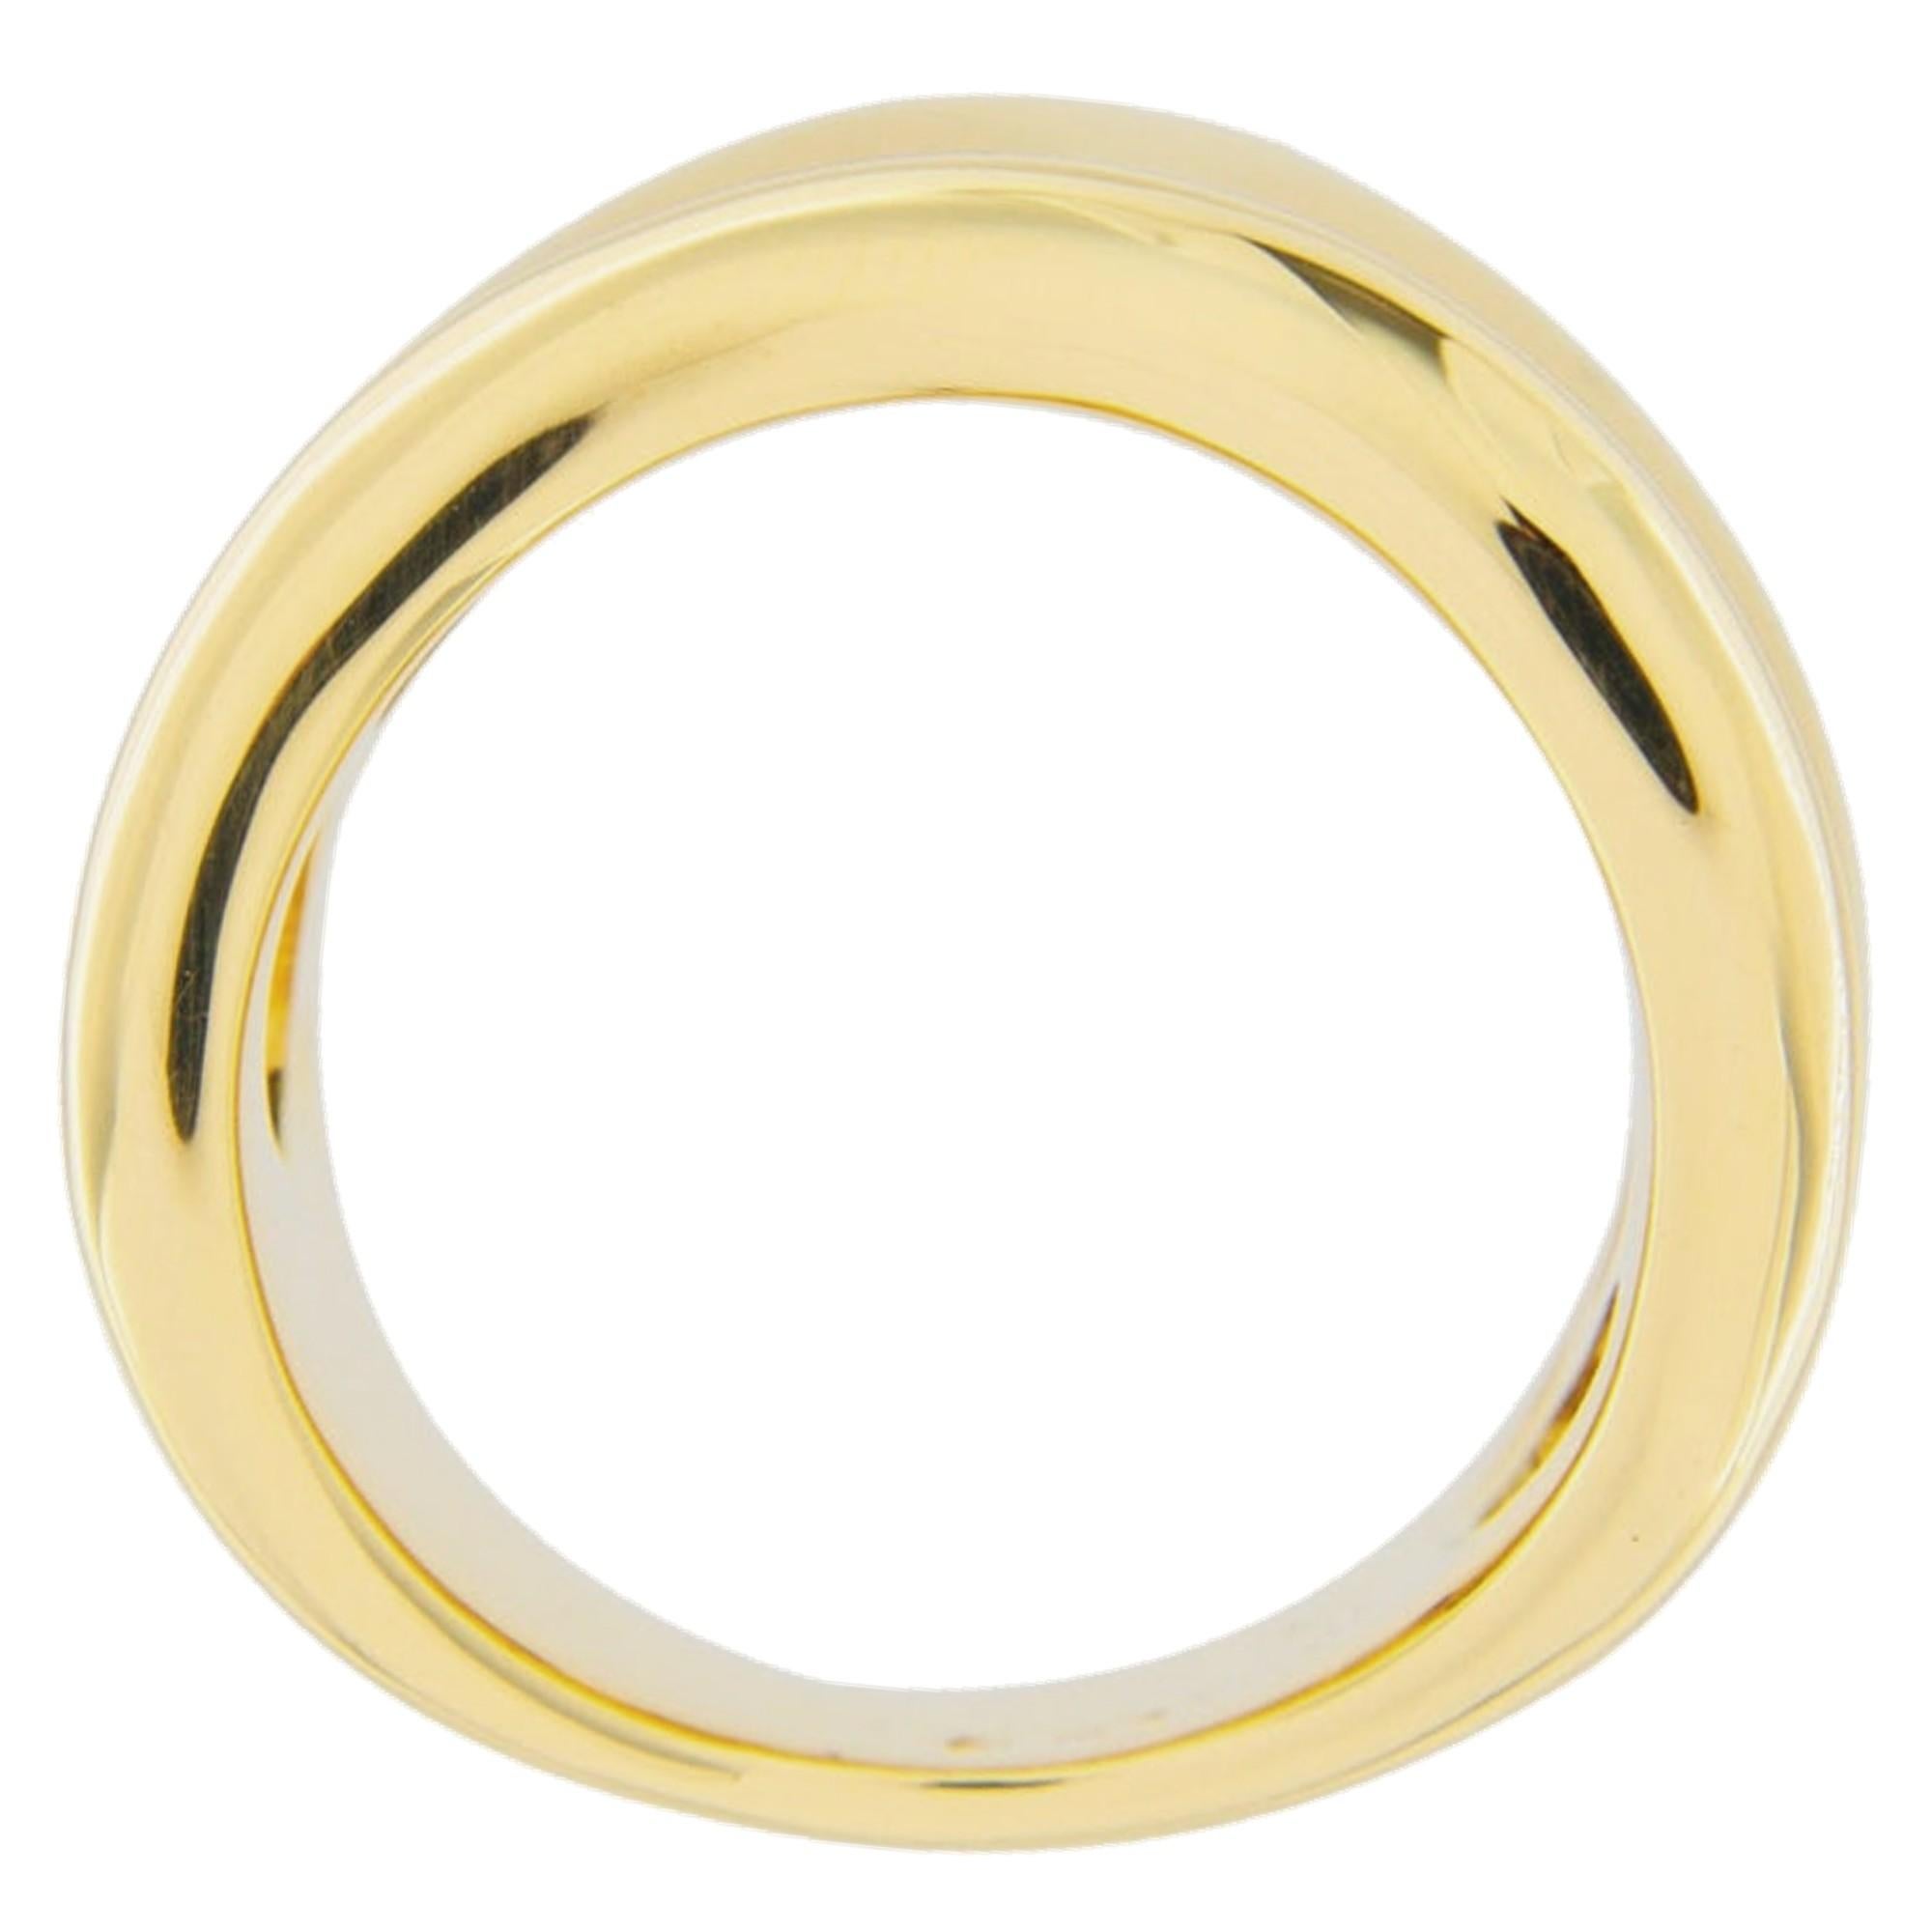 Alex Jona Onda 18 Karat Yellow Gold Ring Band In New Condition For Sale In Torino, IT